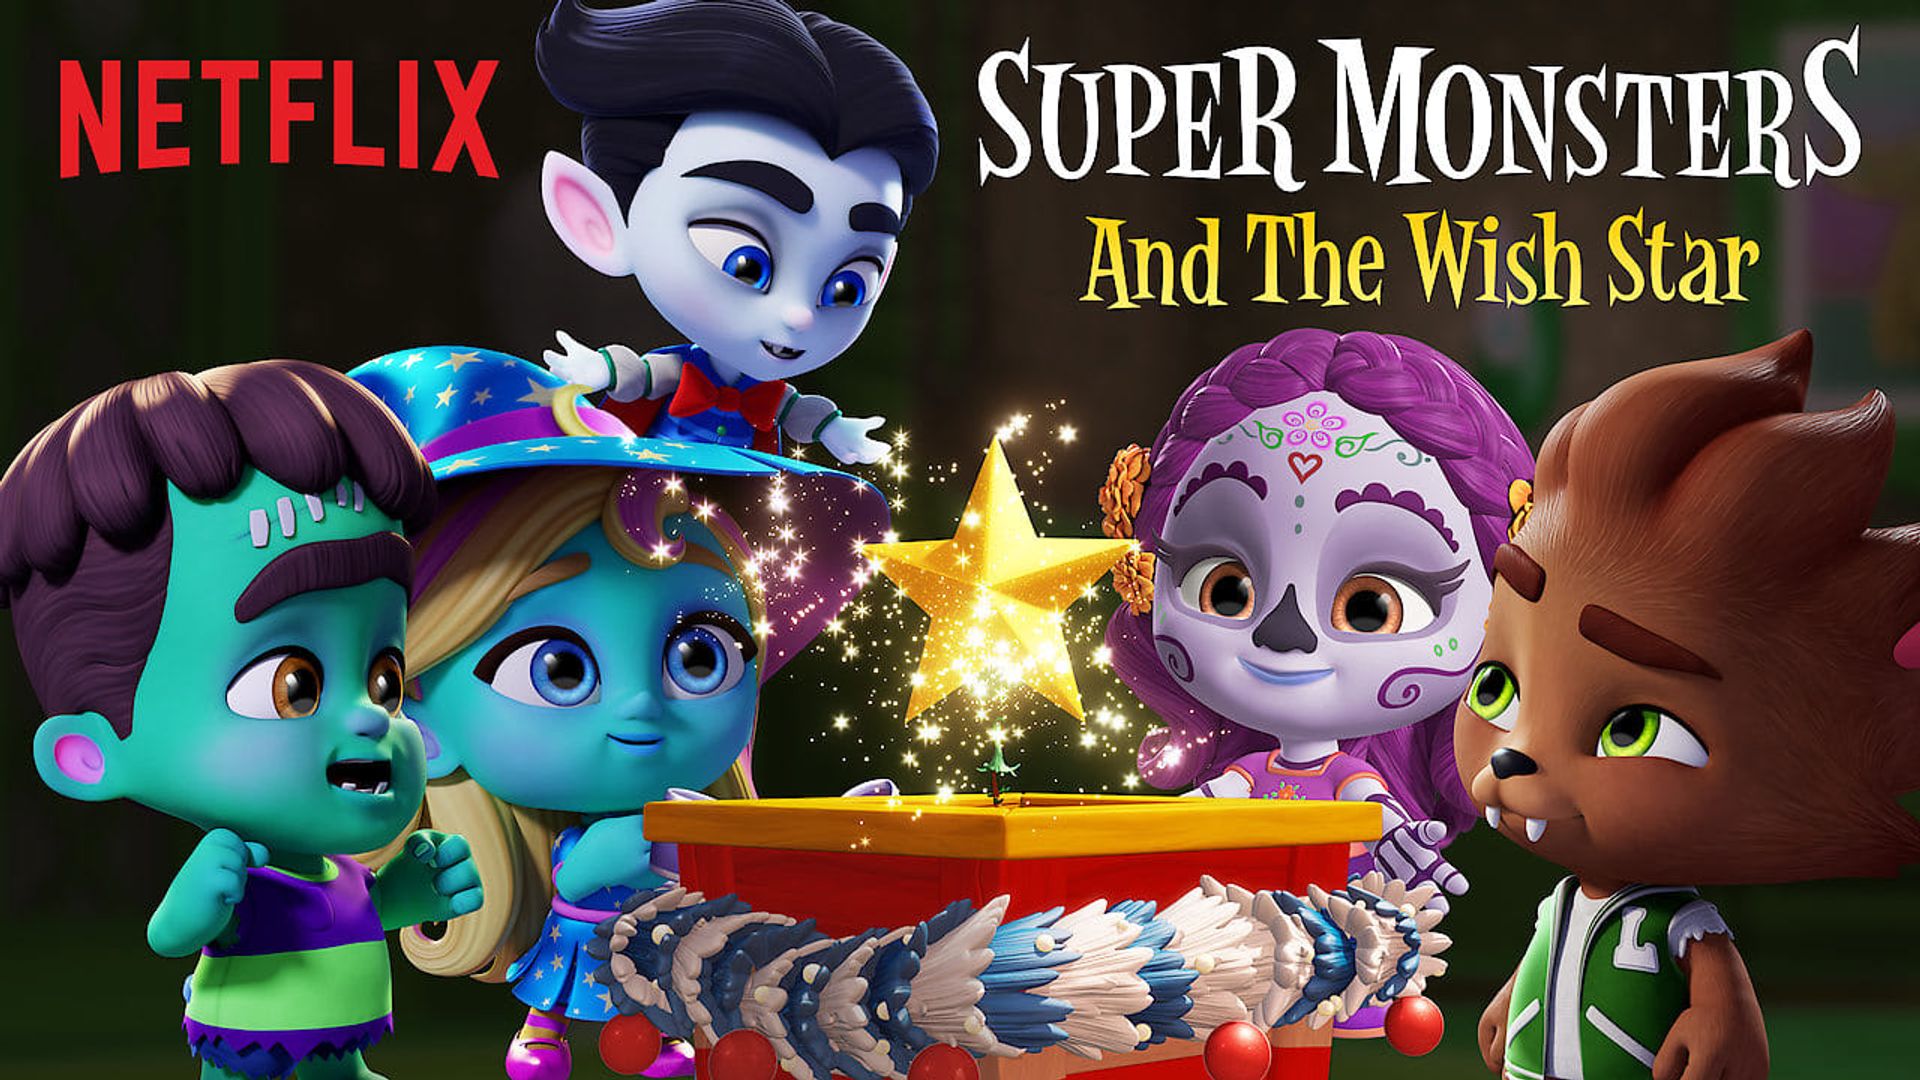 Super Monsters and the Wish Star background